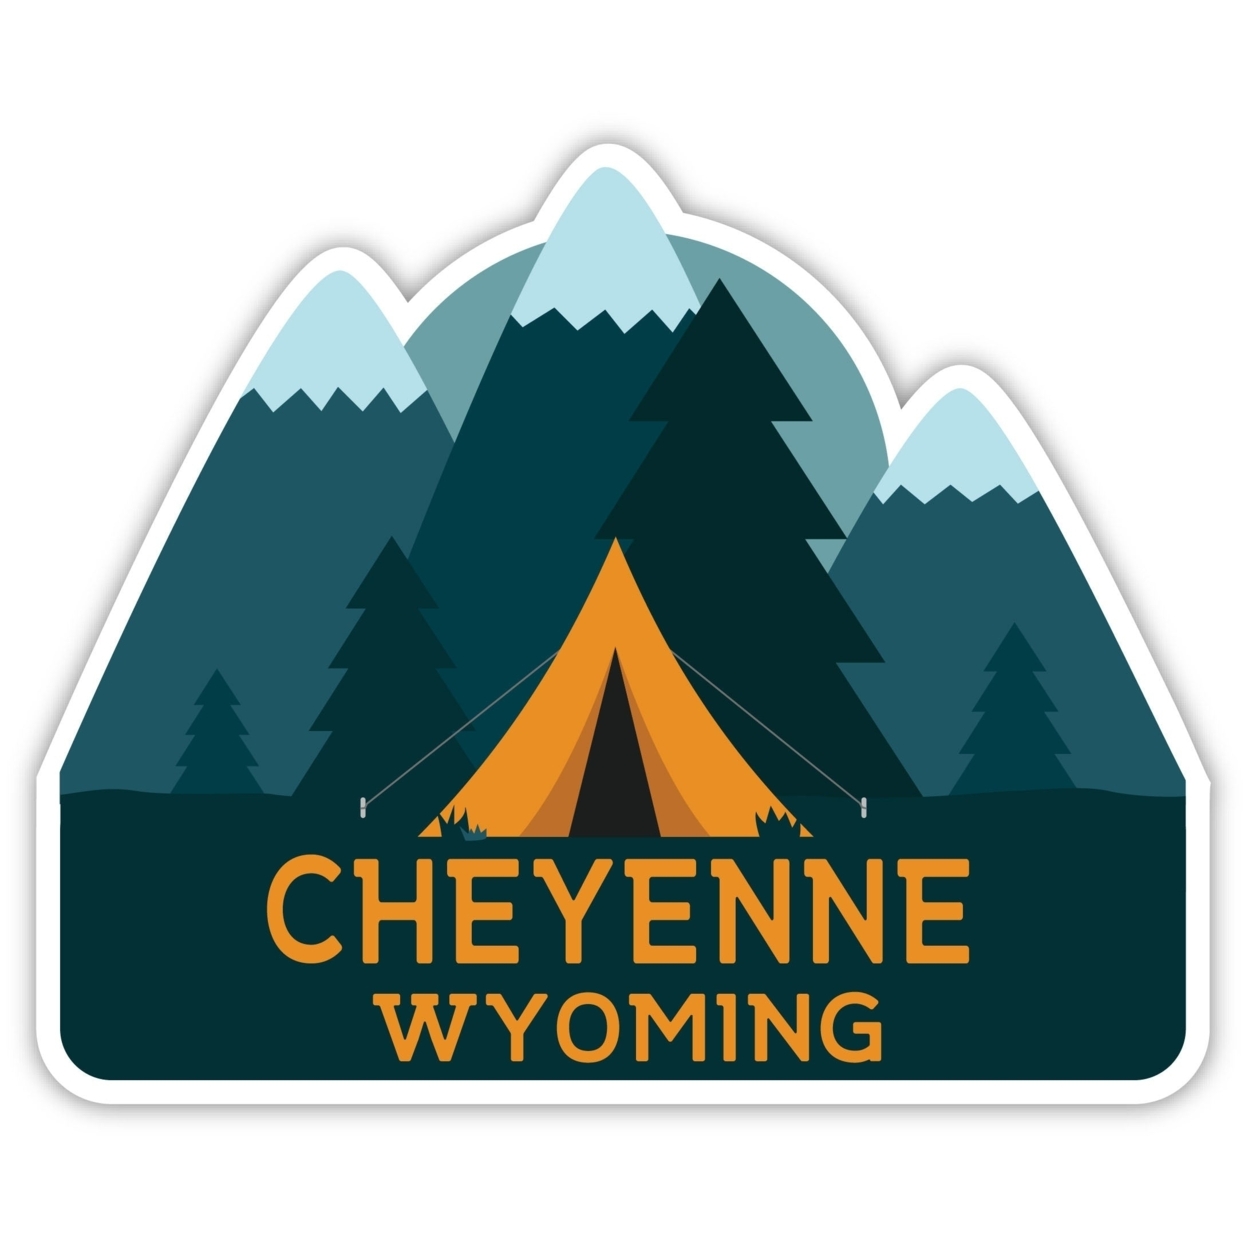 Cheyenne Wyoming Souvenir Decorative Stickers (Choose Theme And Size) - Single Unit, 8-Inch, Great Outdoors